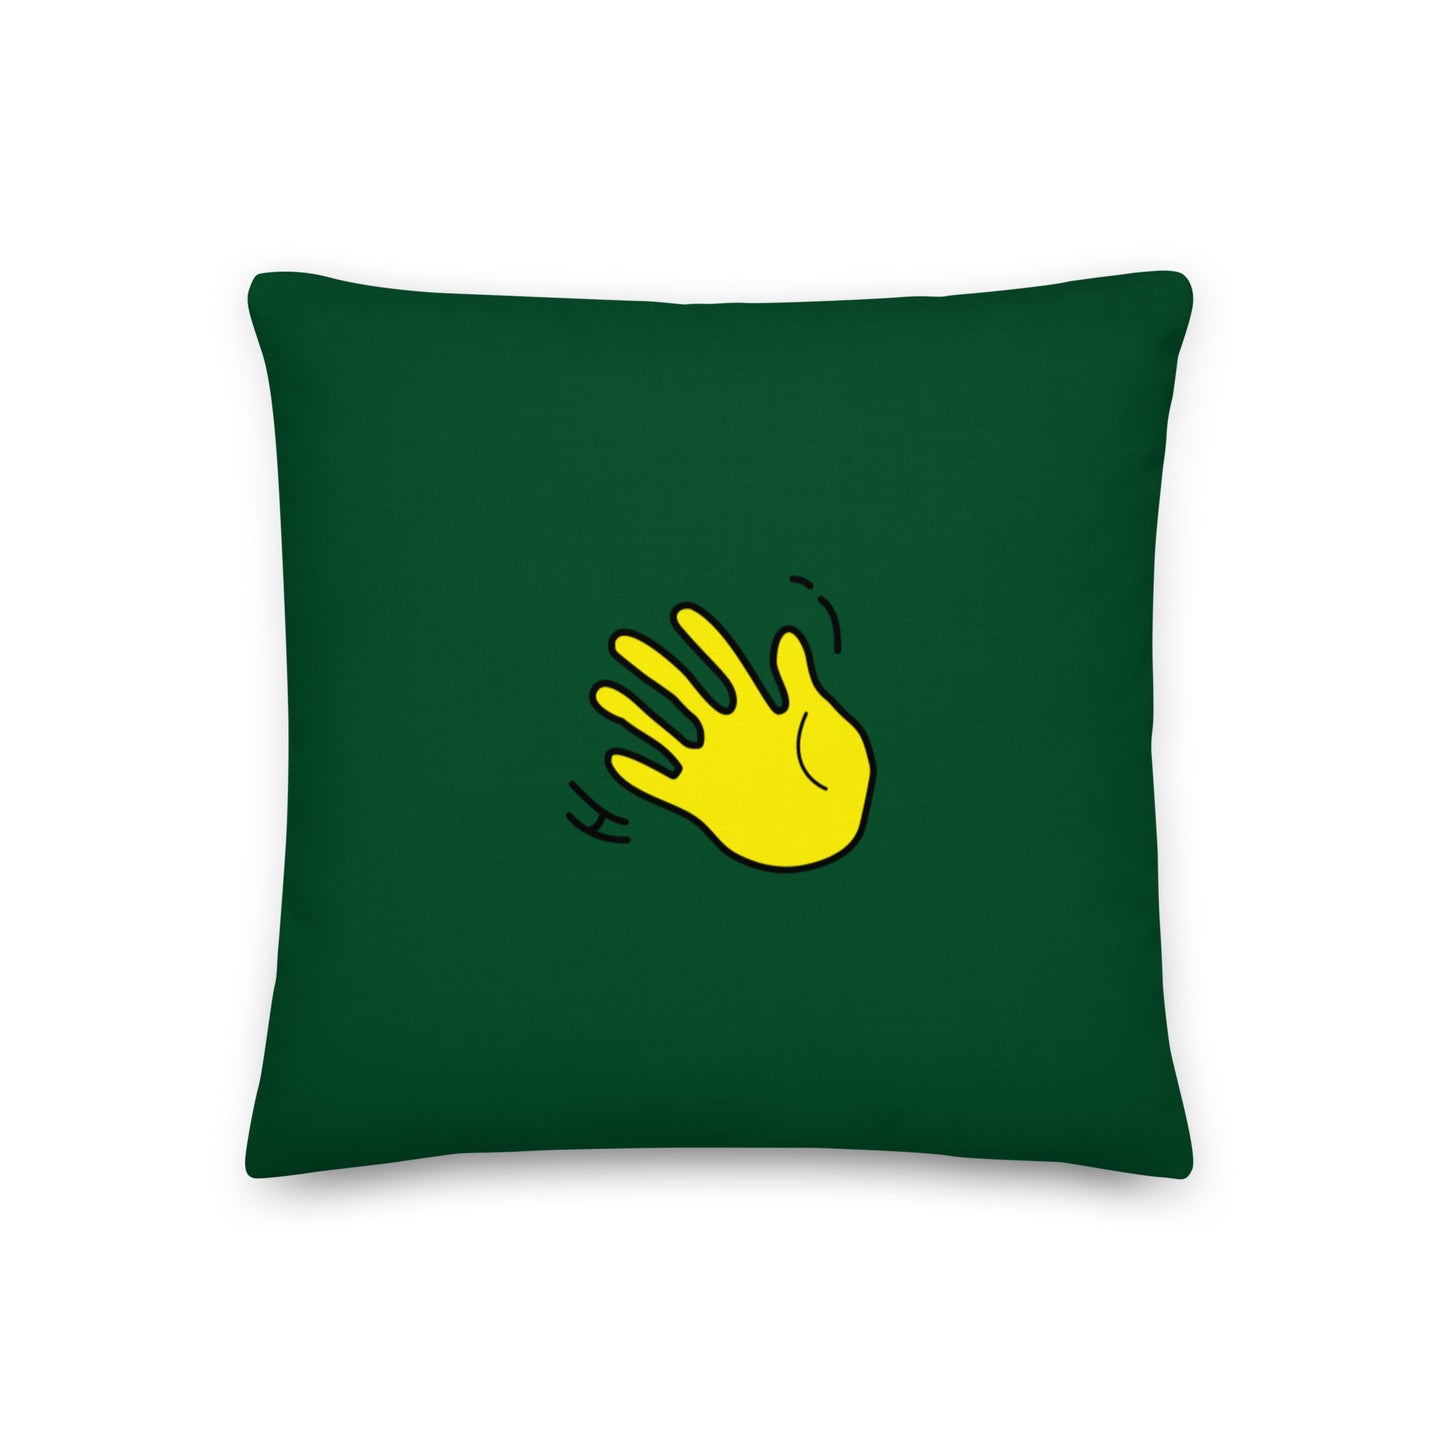 Hi Pillow in green with Hi emoji by HiJohnny.com